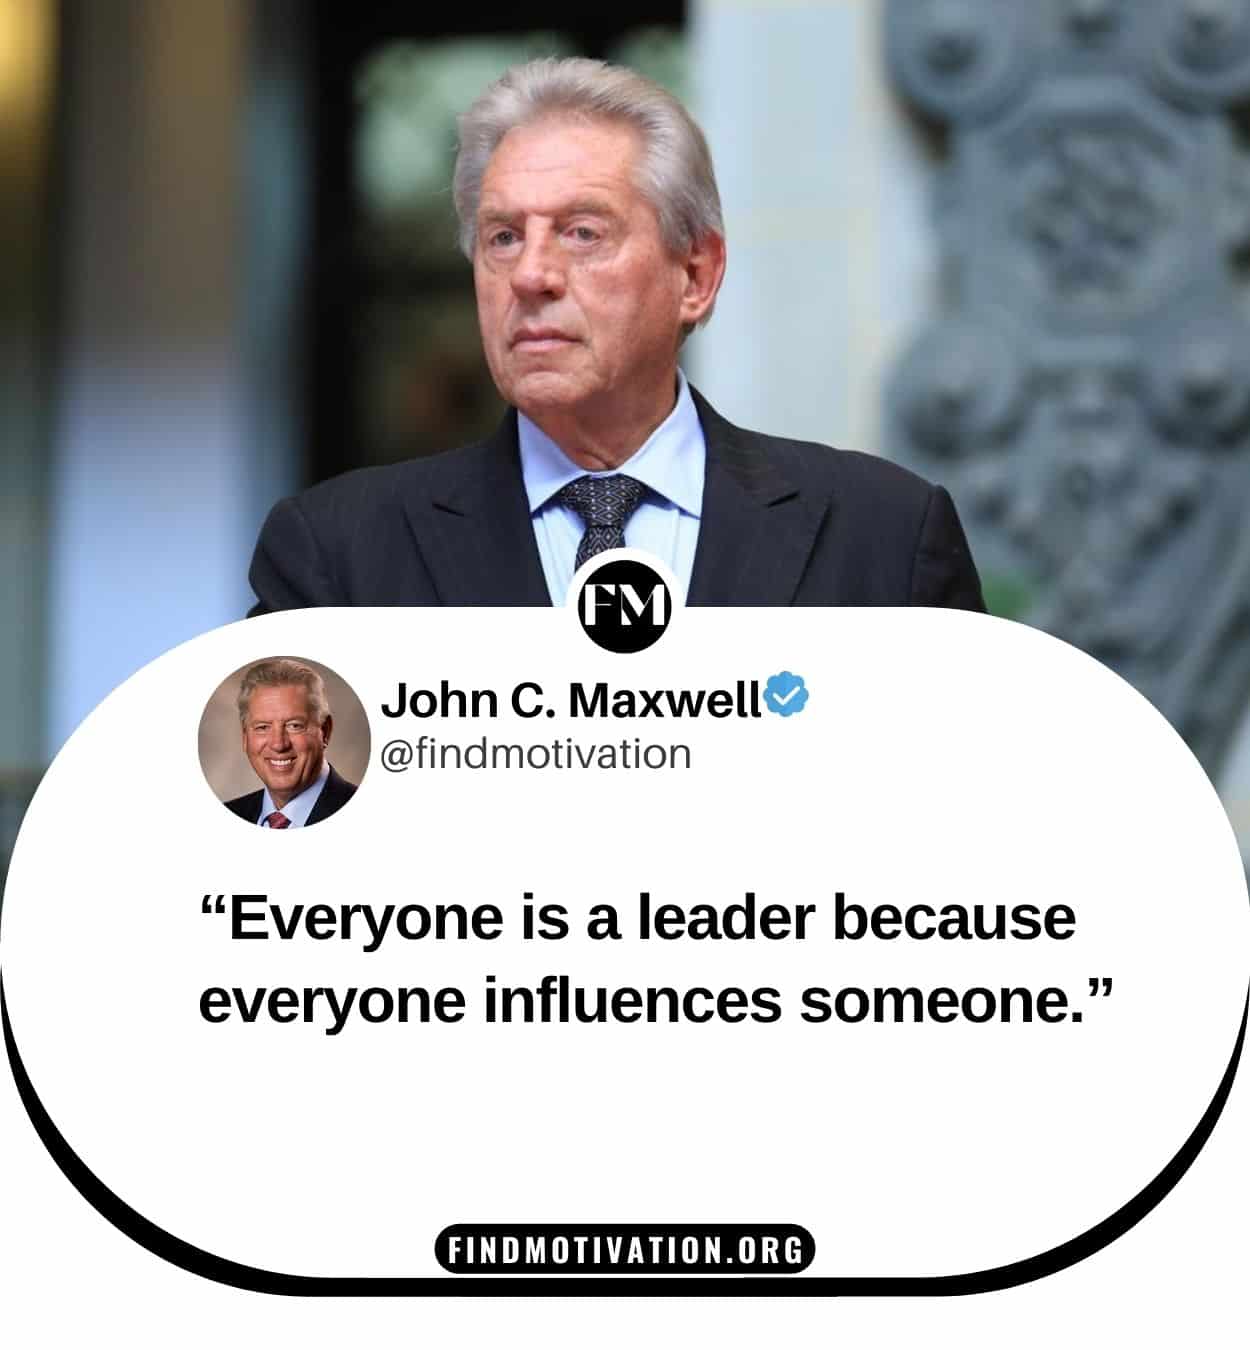 John C Maxwell Leadership Quotes to develop your leadership skills to become a successful leader